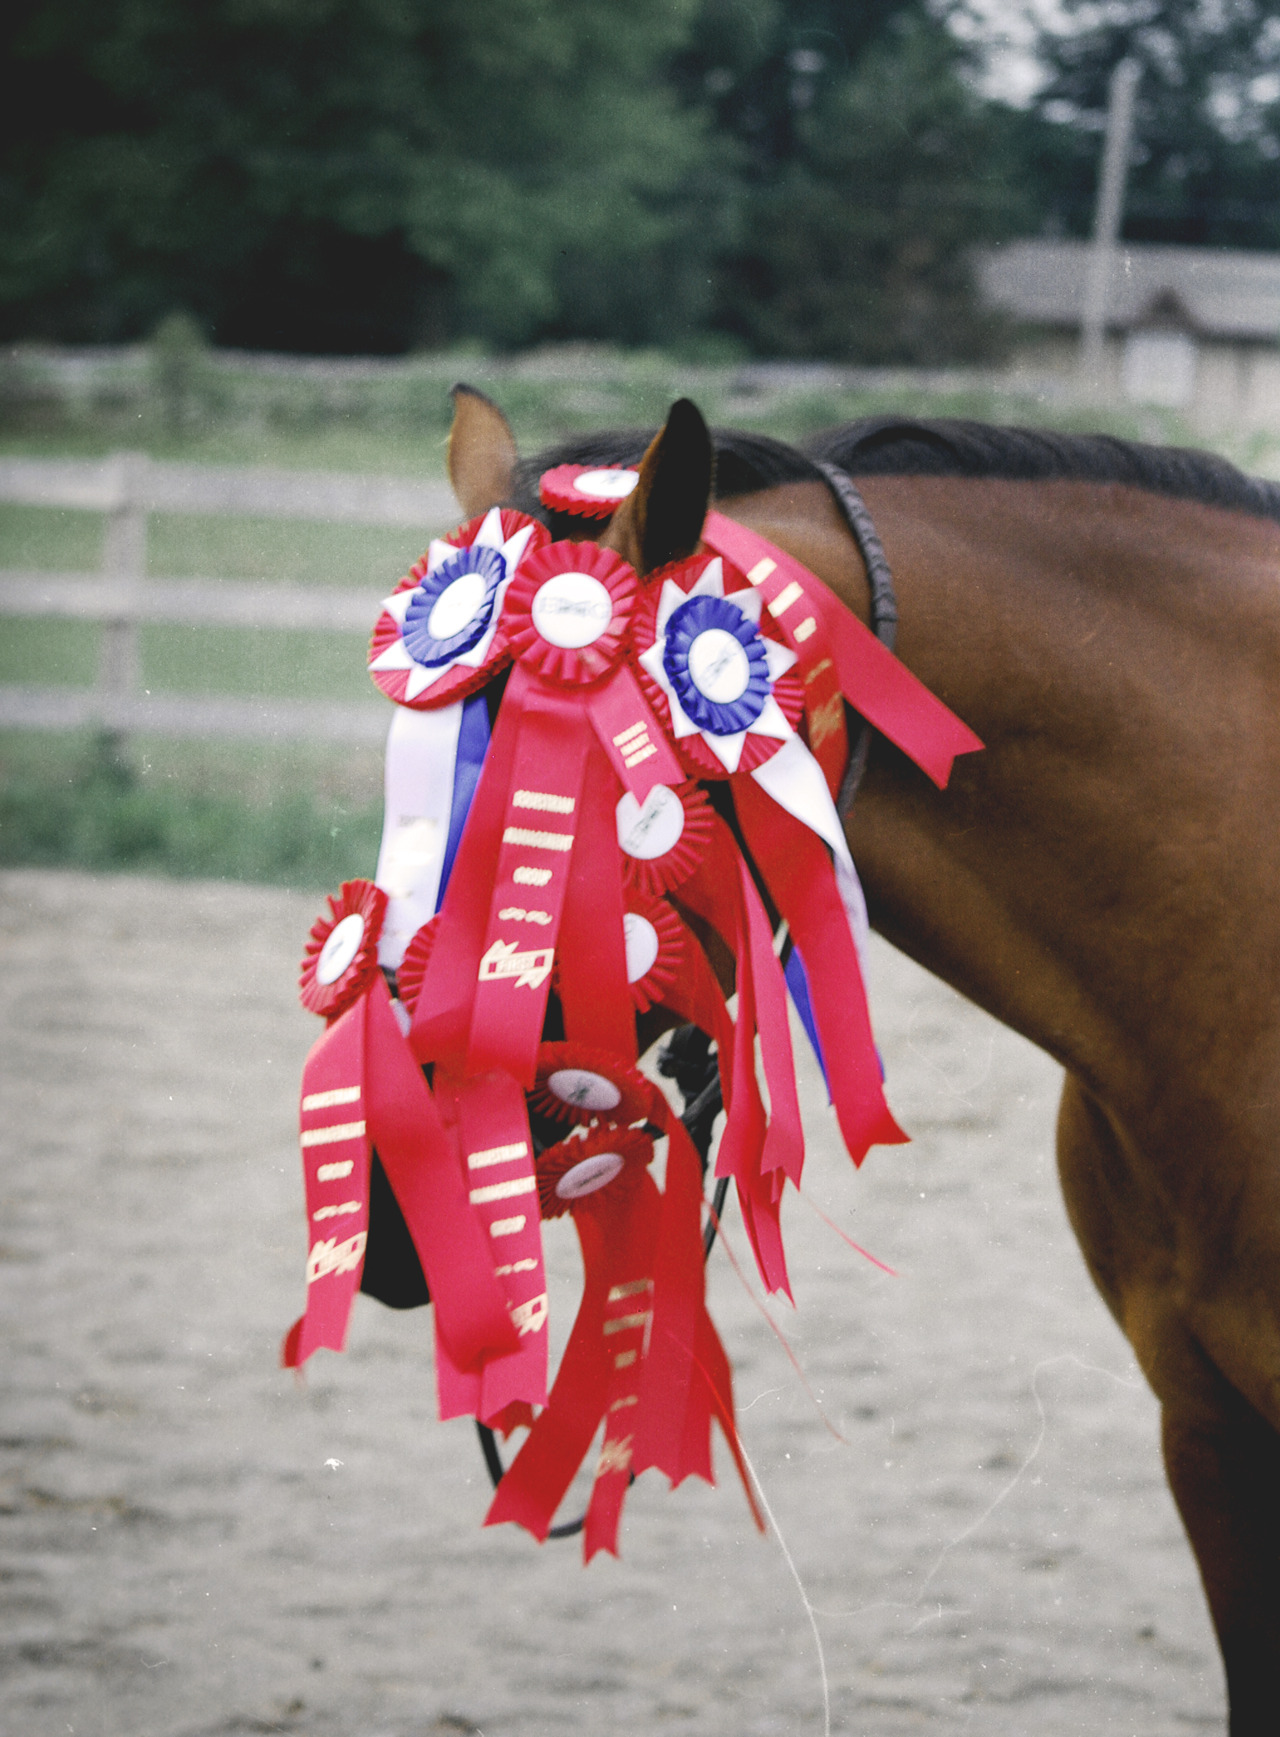 A show pony with its face completely obscured by dozens of county fair ribbons